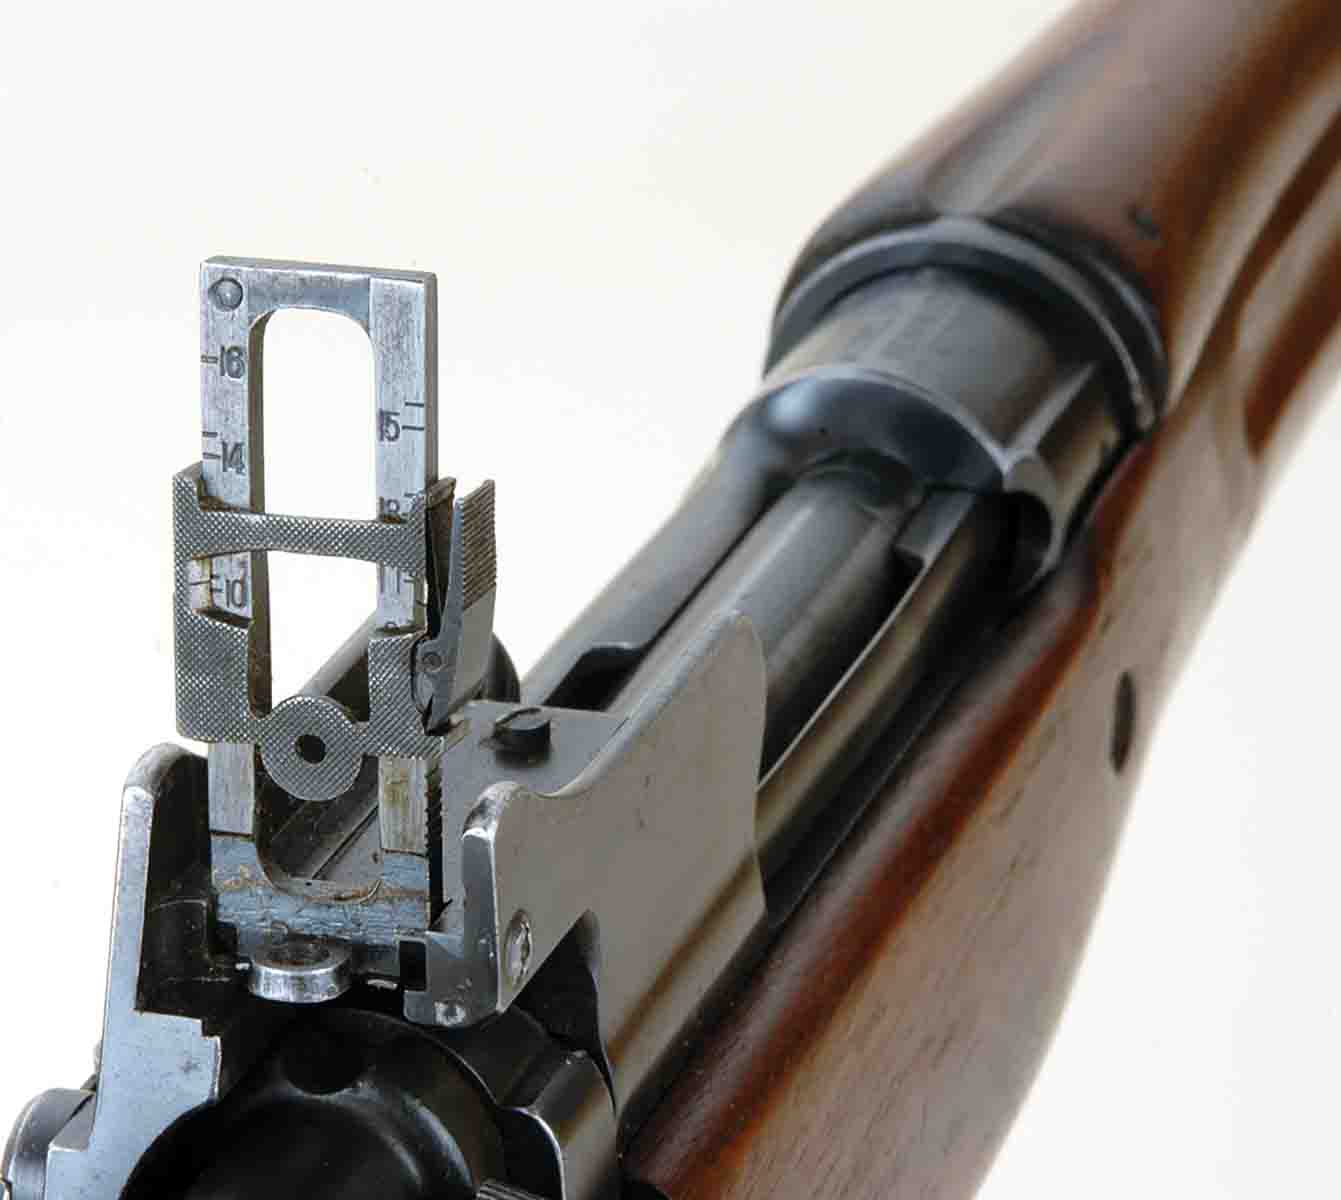 This double aperture rear sight is on a U.S. Model 1917. In essence, it is the same style sight the British later utilized on the No. 4 Mk I.